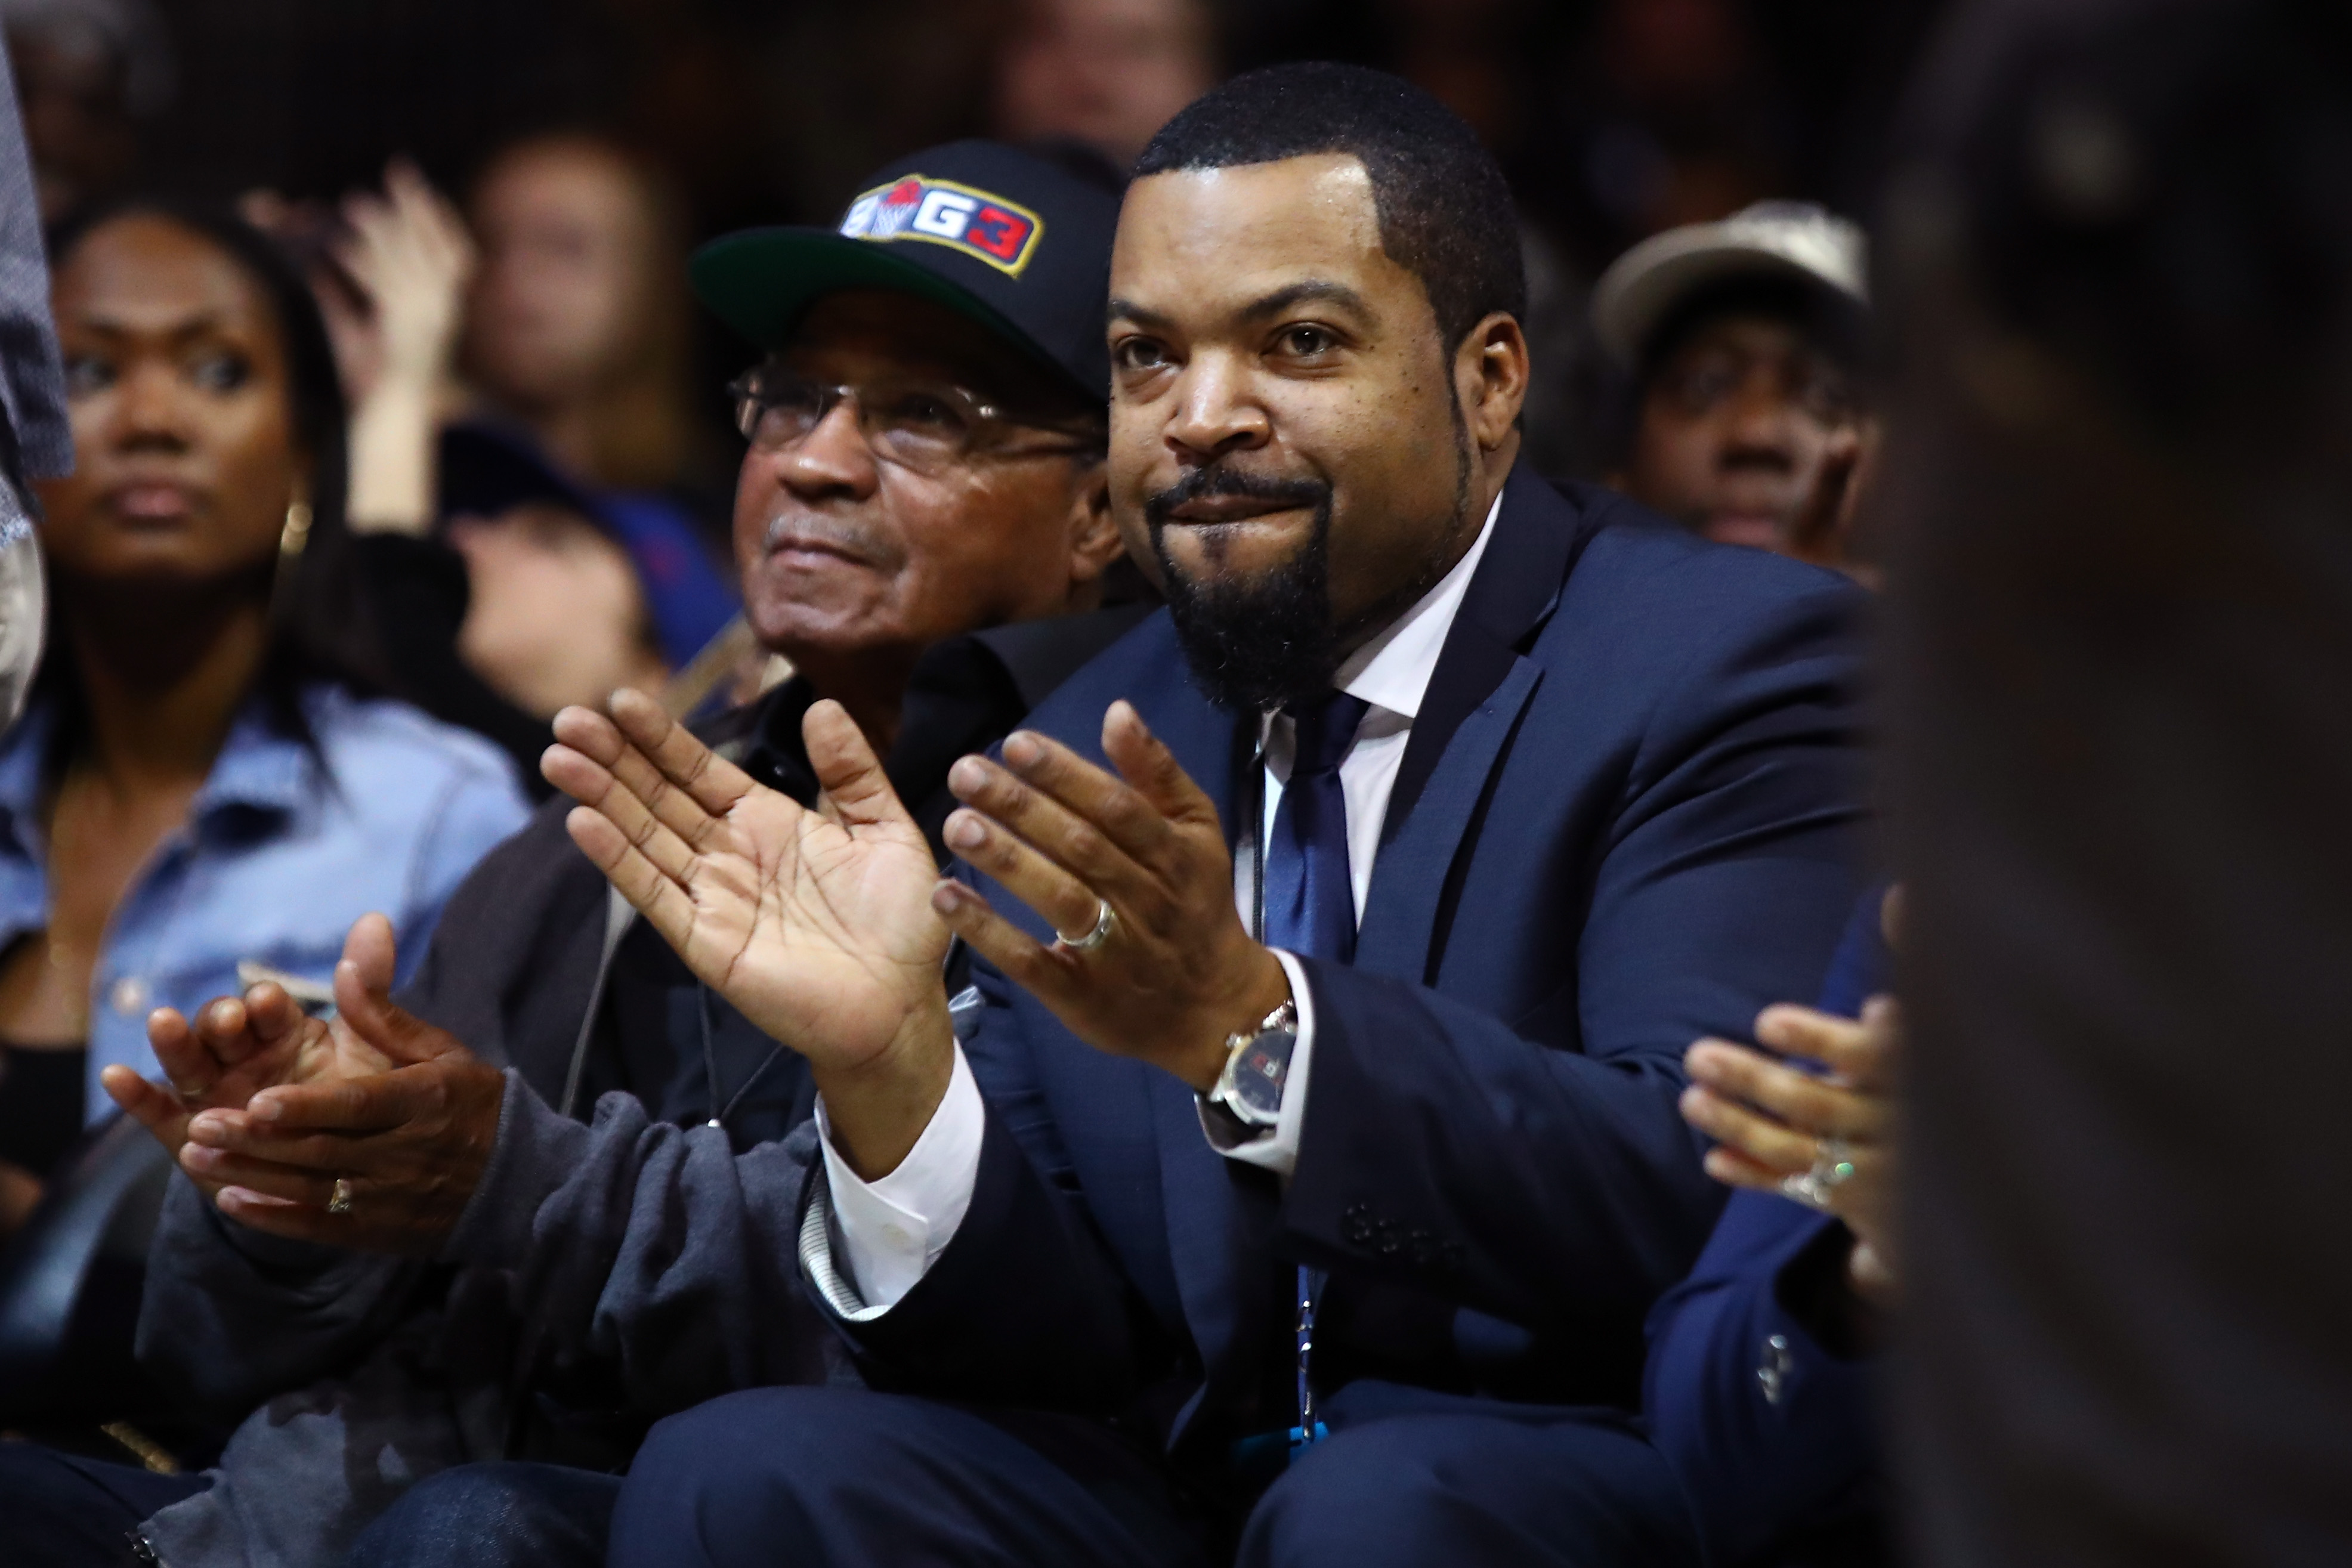 NEW YORK, NY - JUNE 25: League founder Ice Cube acknowledges the crowd during week one of the BIG3 three on three basketball league at Barclays Center on June 25, 2017 in New York City.